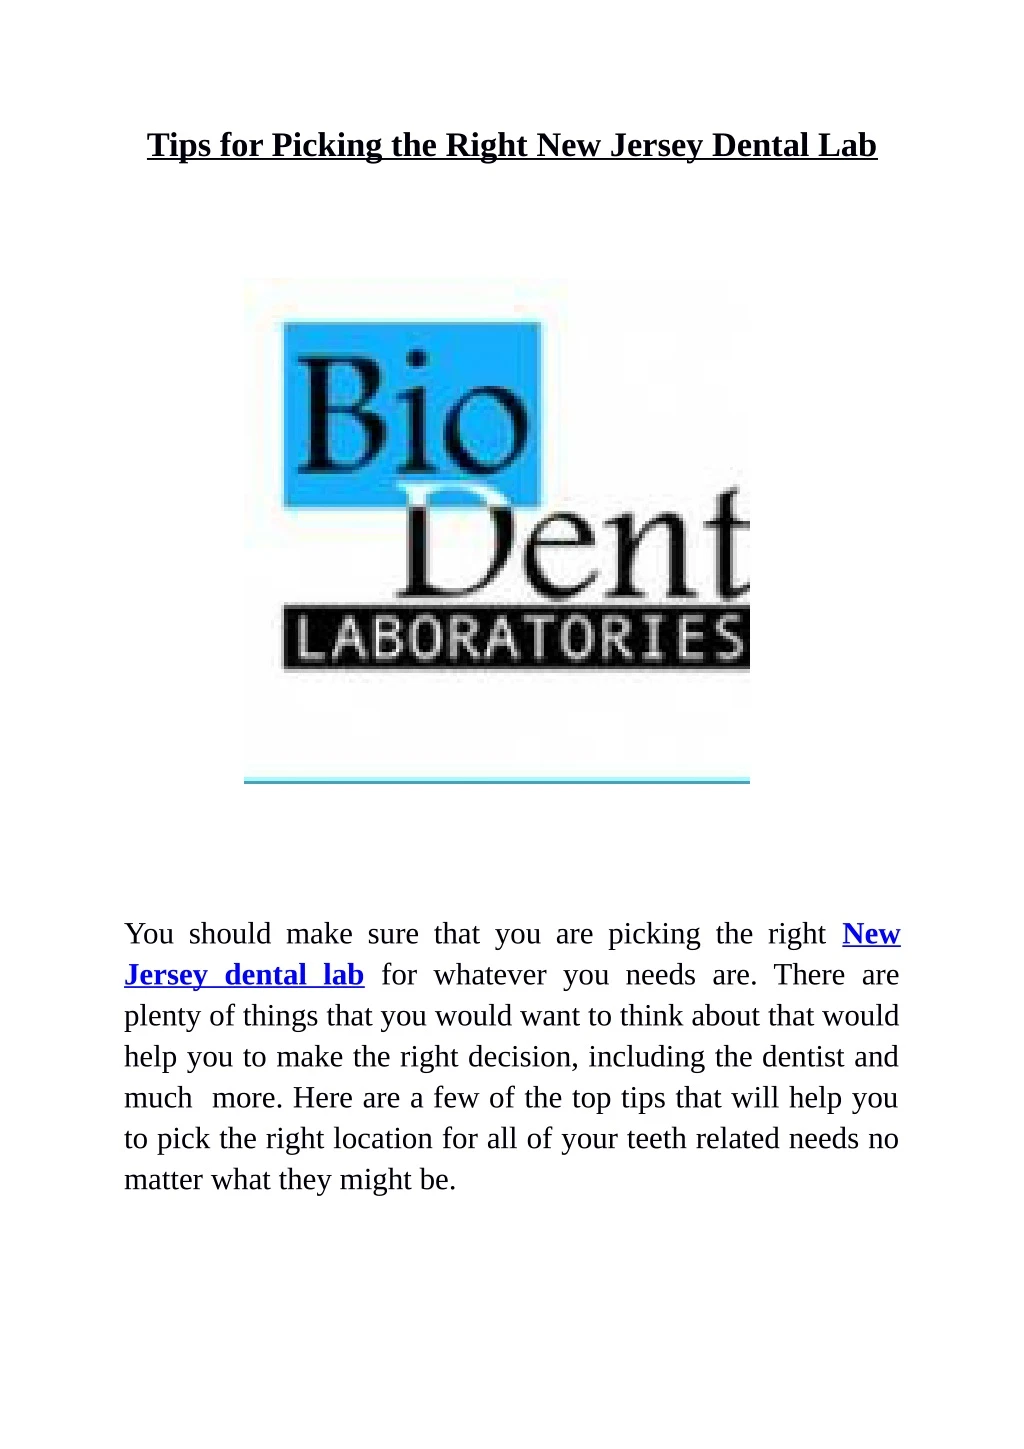 tips for picking the right new jersey dental lab